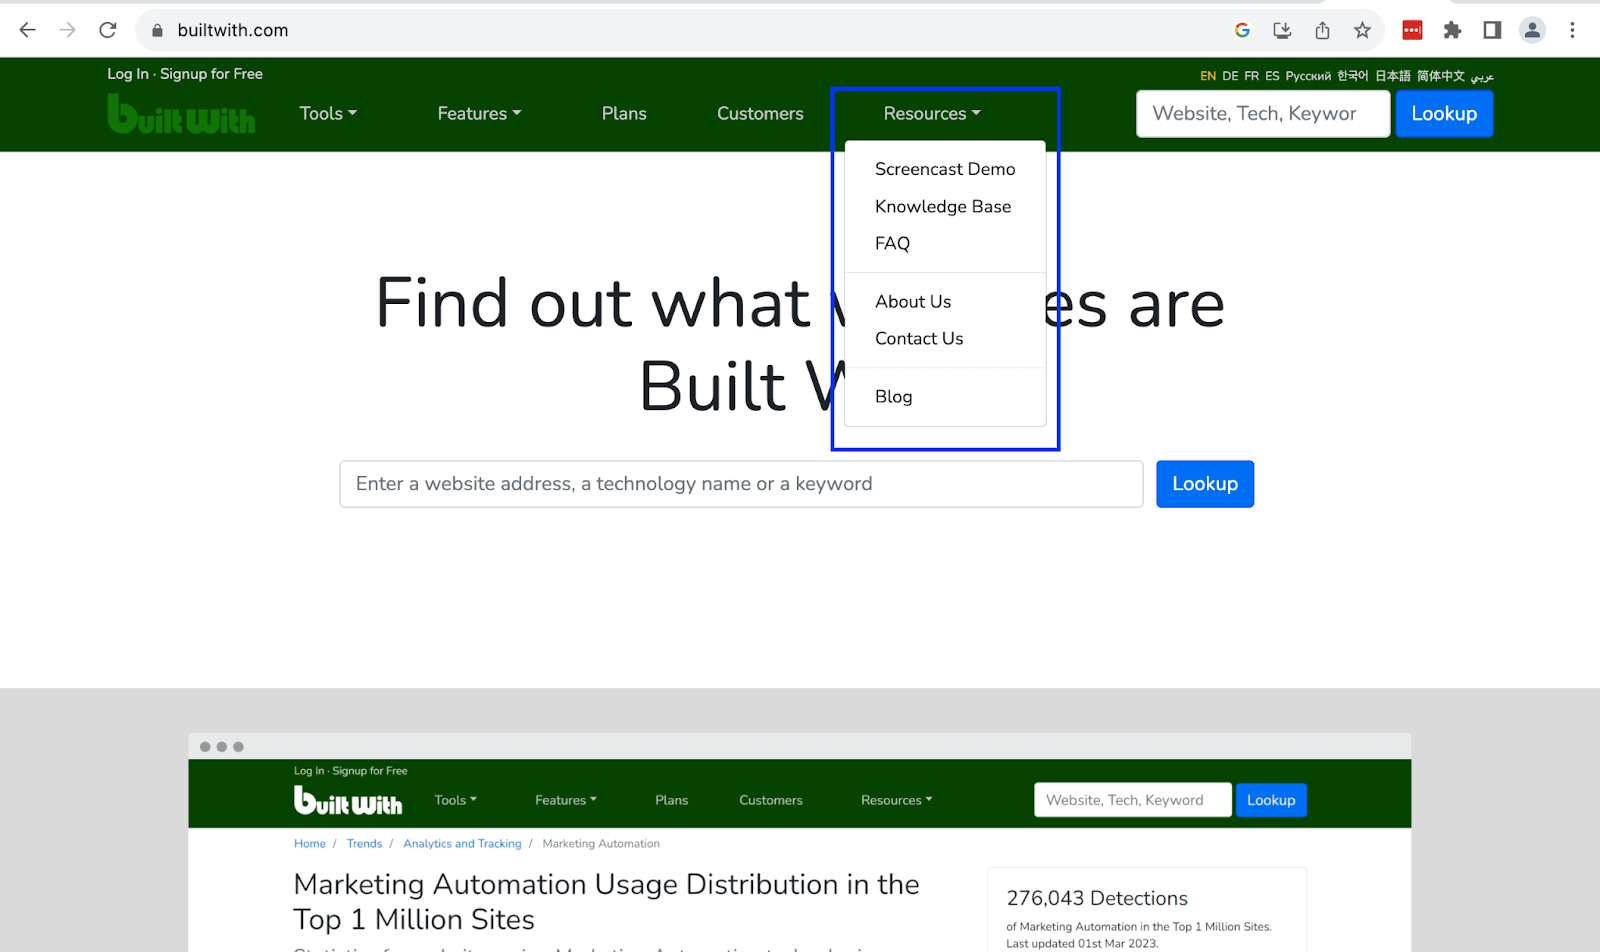 BuiltWith website uses